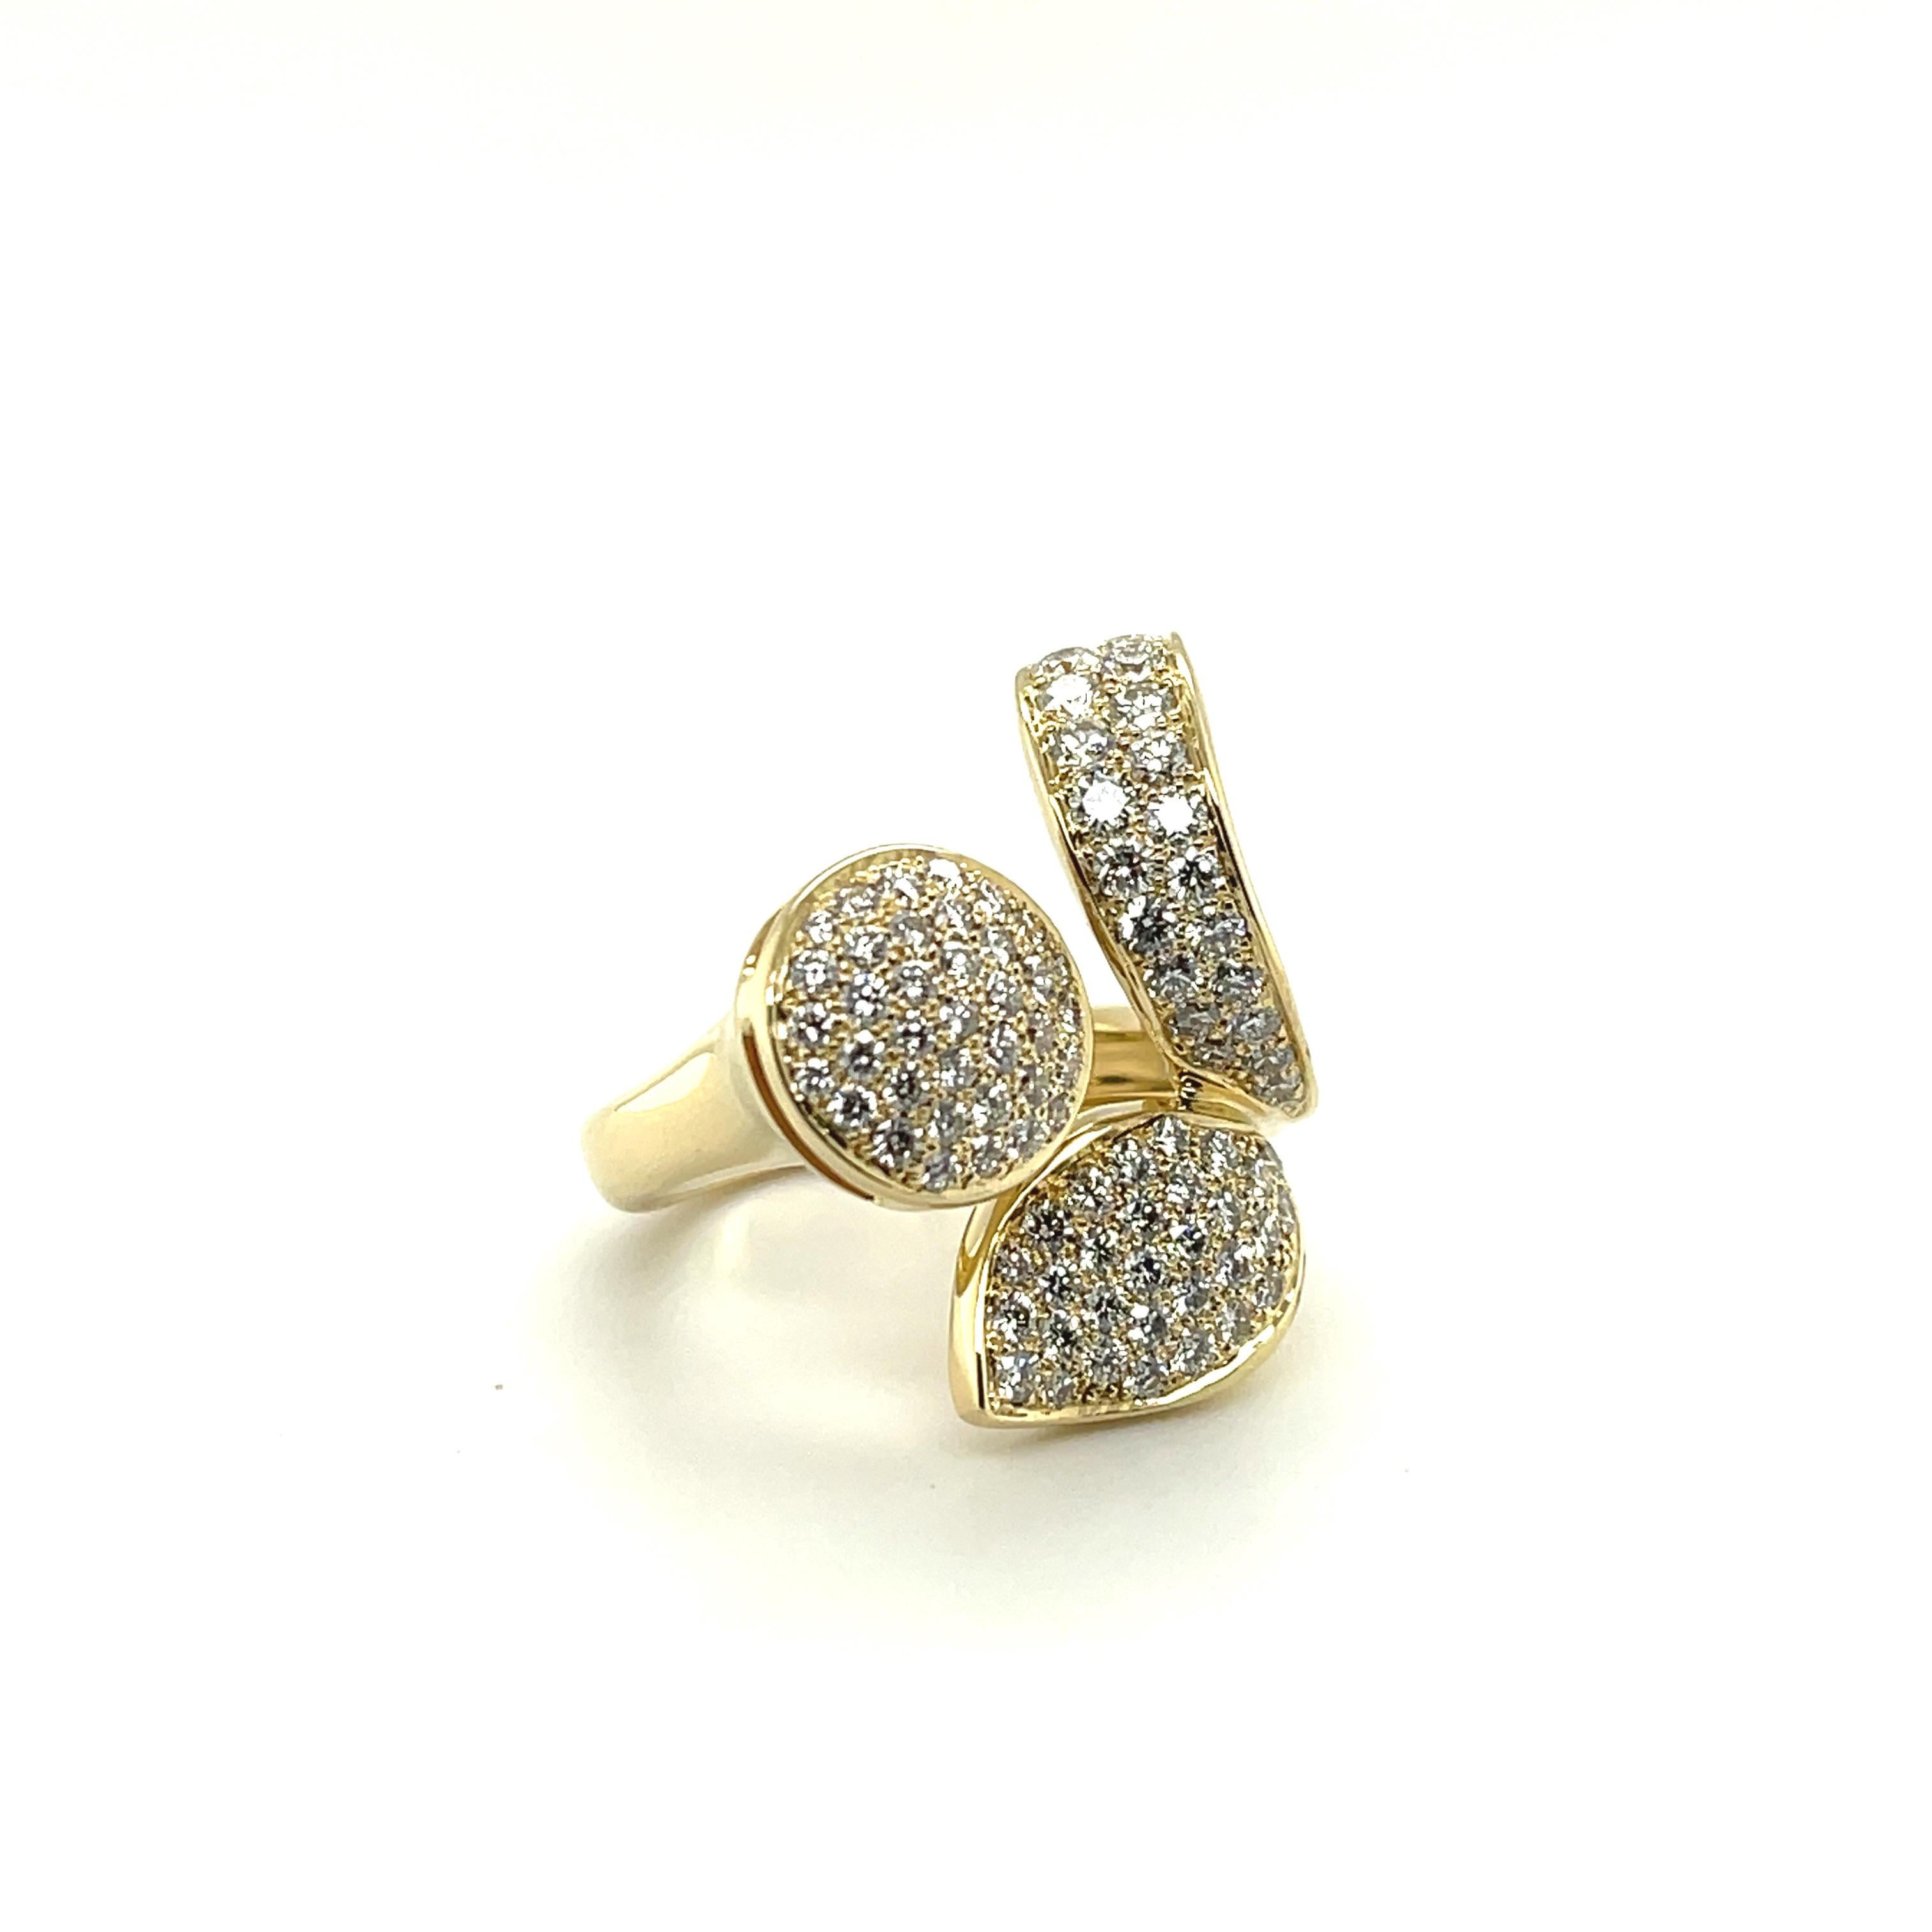 Modern RC003 - 18K Yellow Gold Fancy Shapes Ring with Round Brilliant Diamonds For Sale